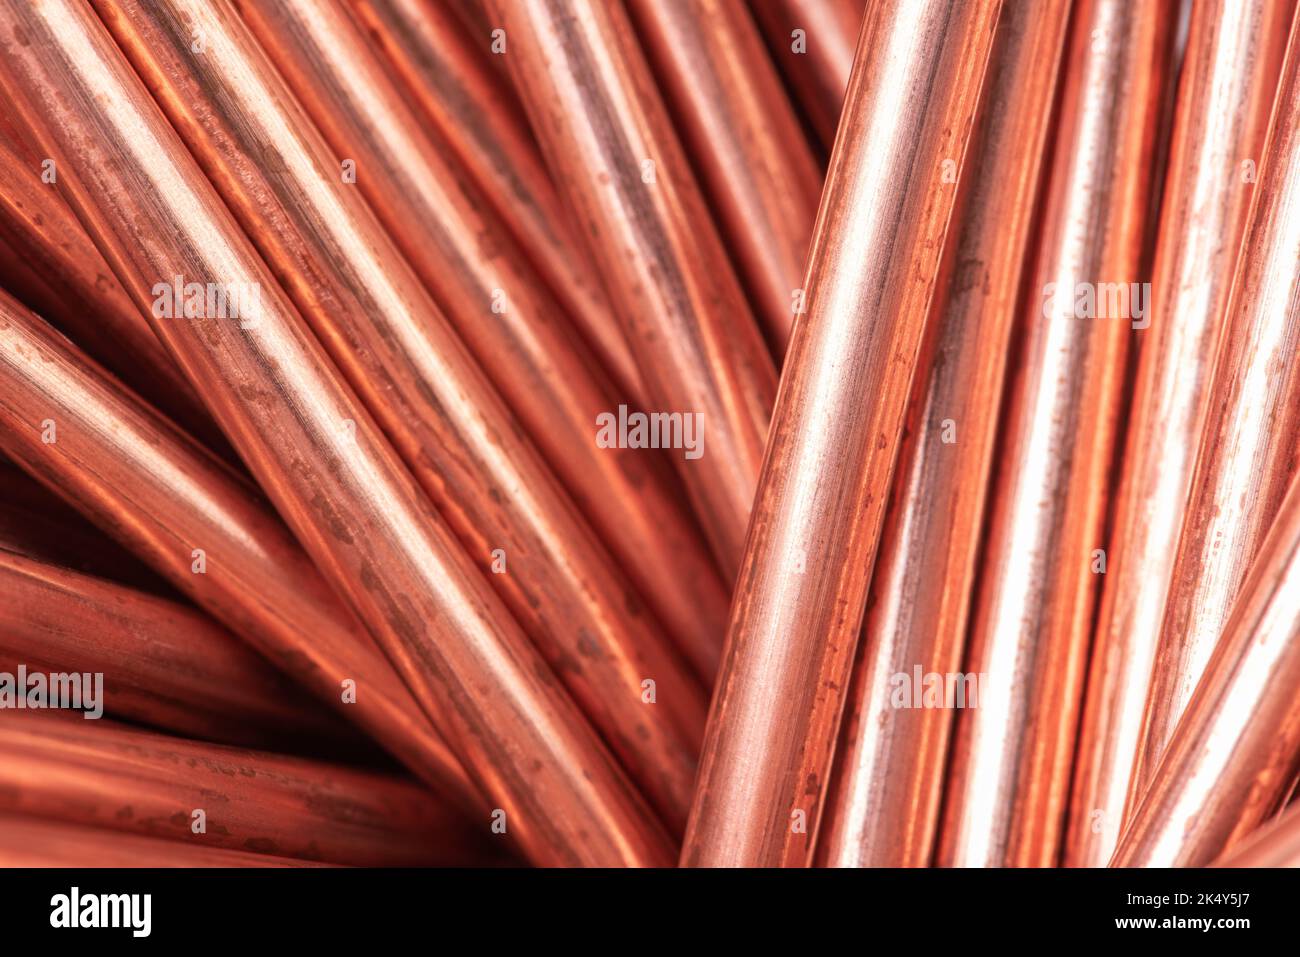 Copper rod raw materials and metals industry and stock market concept Stock Photo